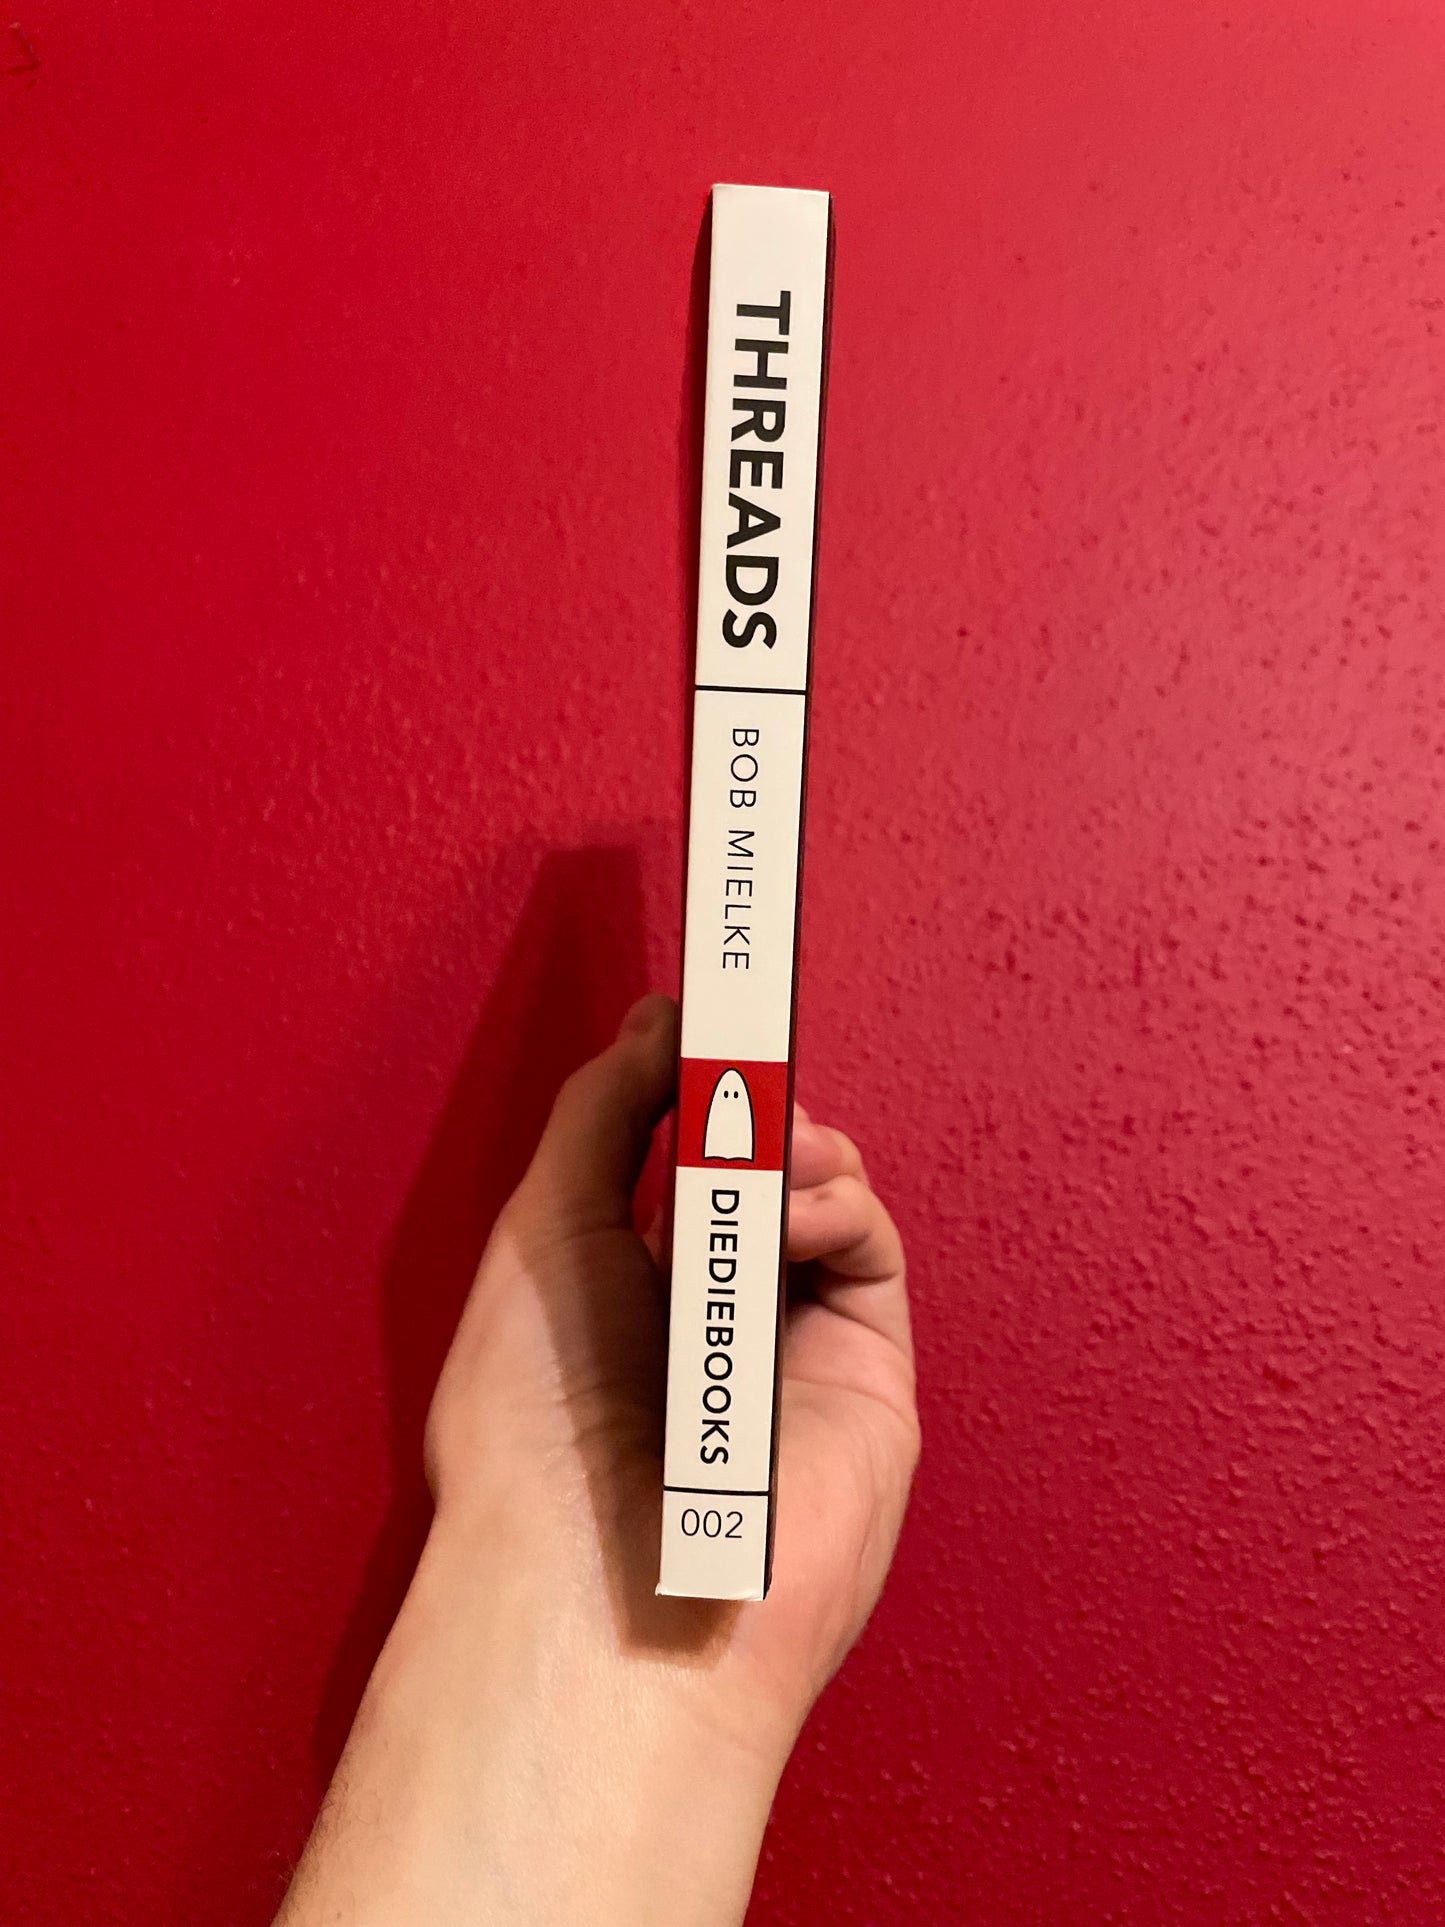 Image of a hand holding up a Threads book to show the black-and-white spine